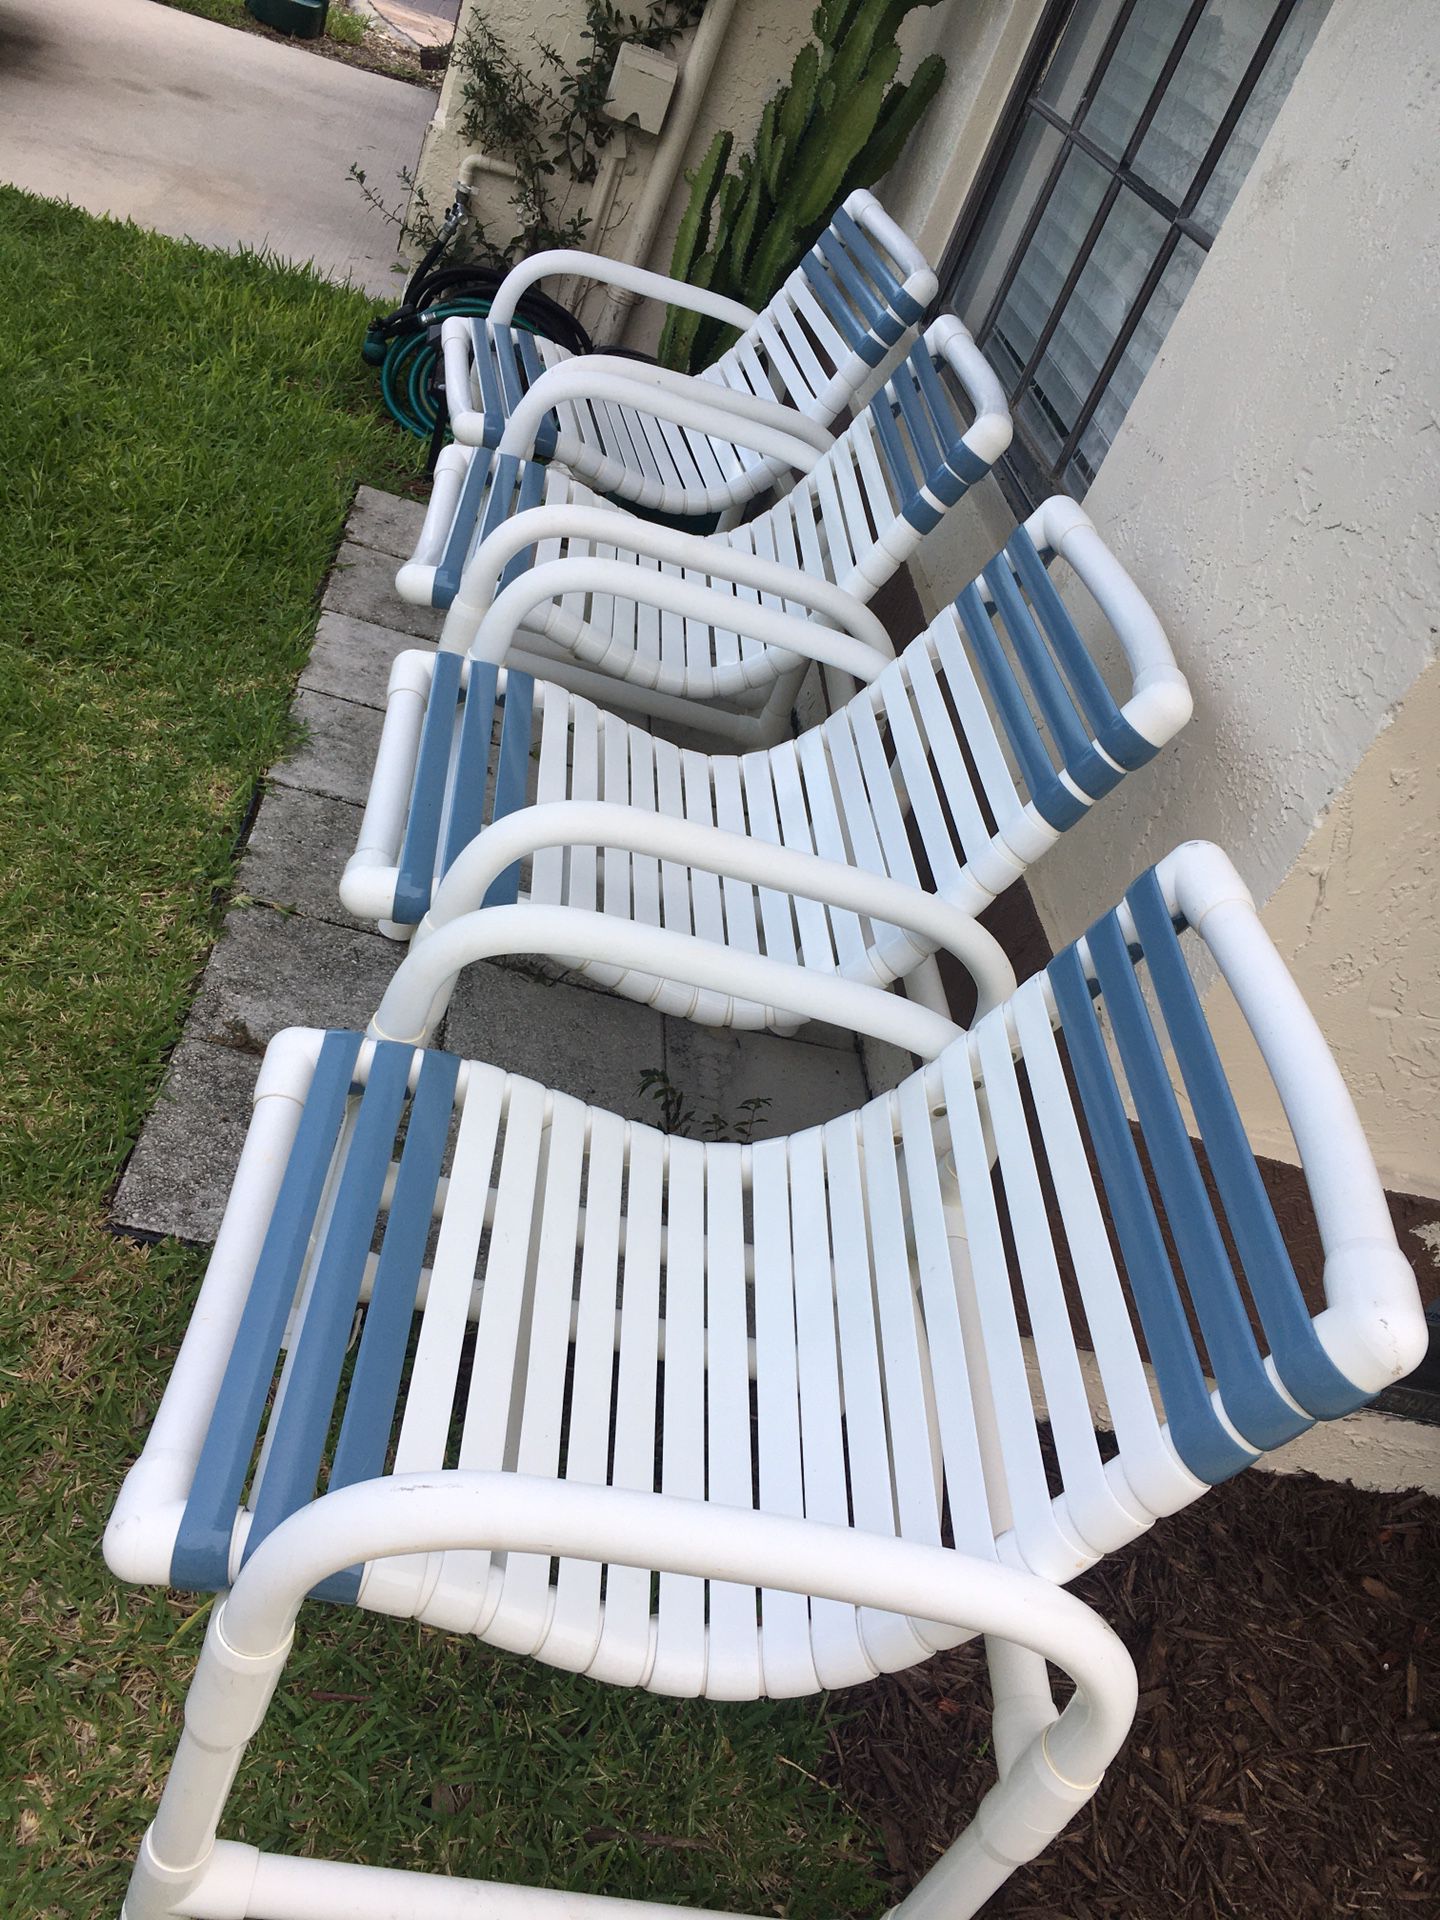 Outdoor pool chairs